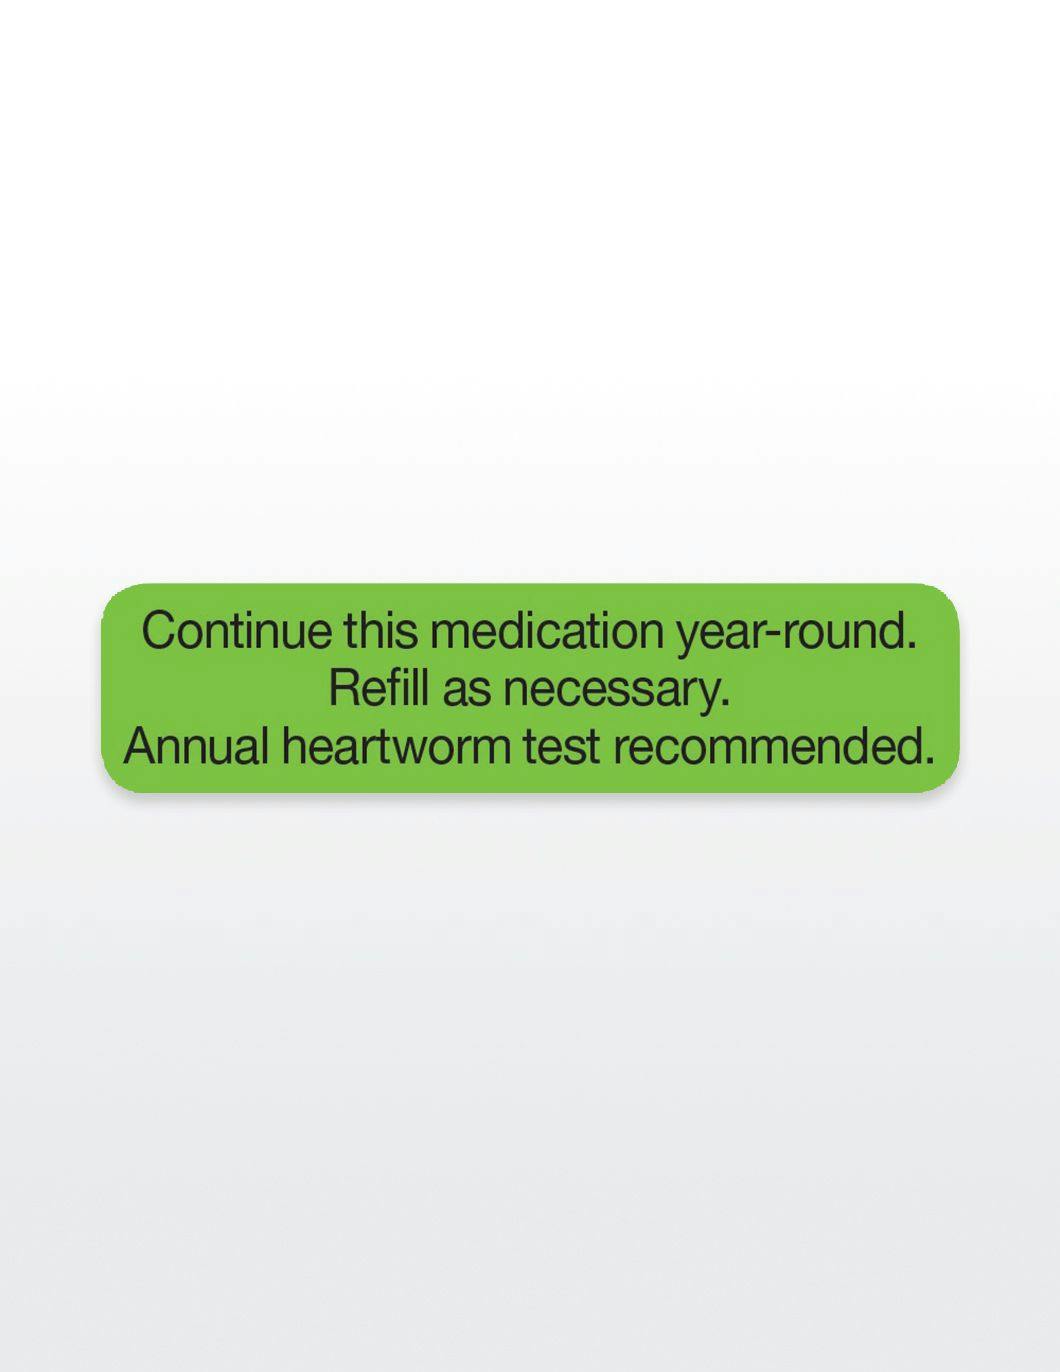 continue-this-medication-year-round-med-stickers